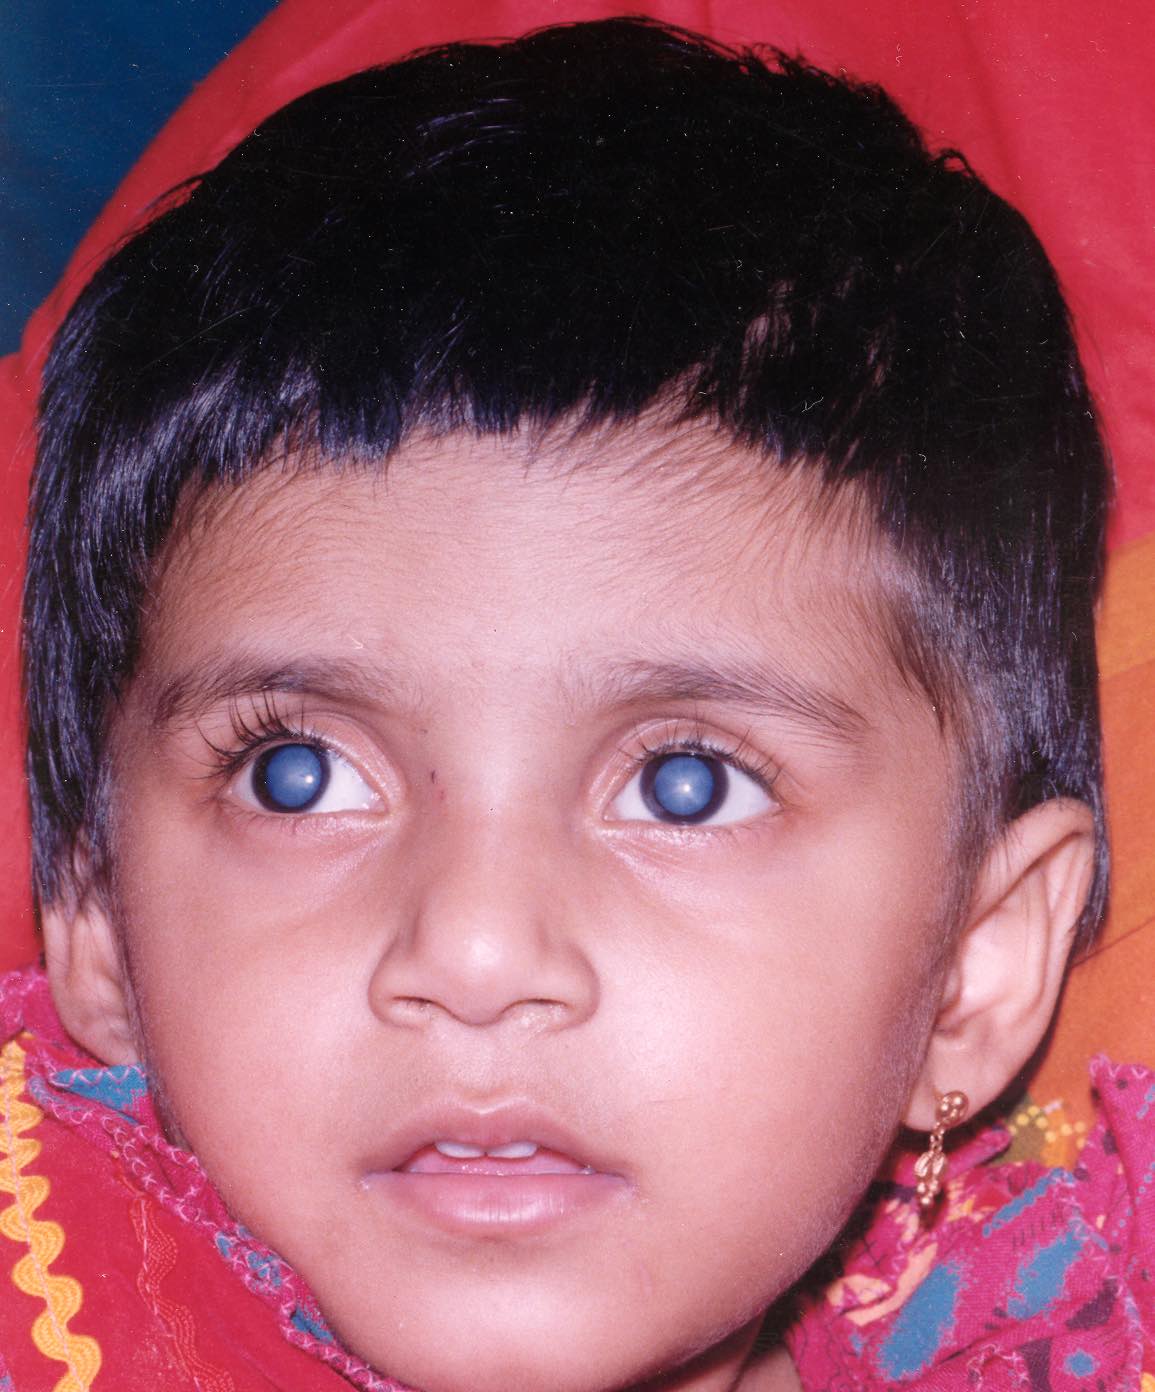 A child with dense, bilateral cataract. Both eyes are likely to be amblyopic if the cataracts were present since birth. INDIA (Photo: ©Aravind eye care CC BY-NC-SA 4.0)